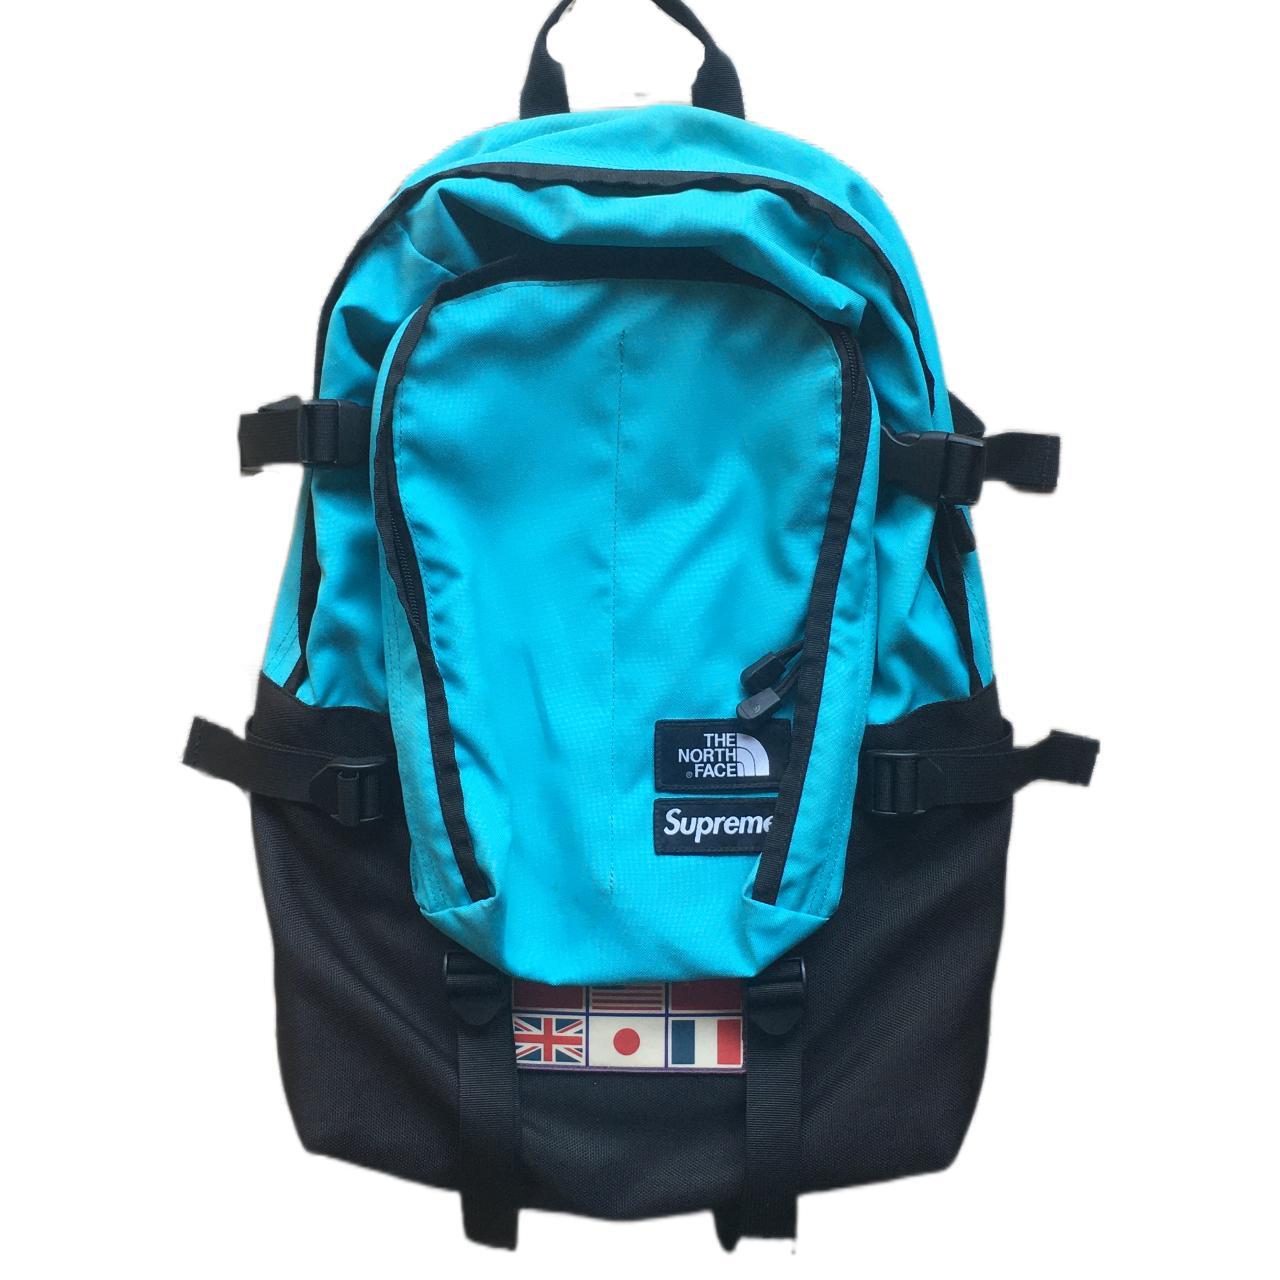 Supreme x The North Face SS14 Backpack Released in... - Depop